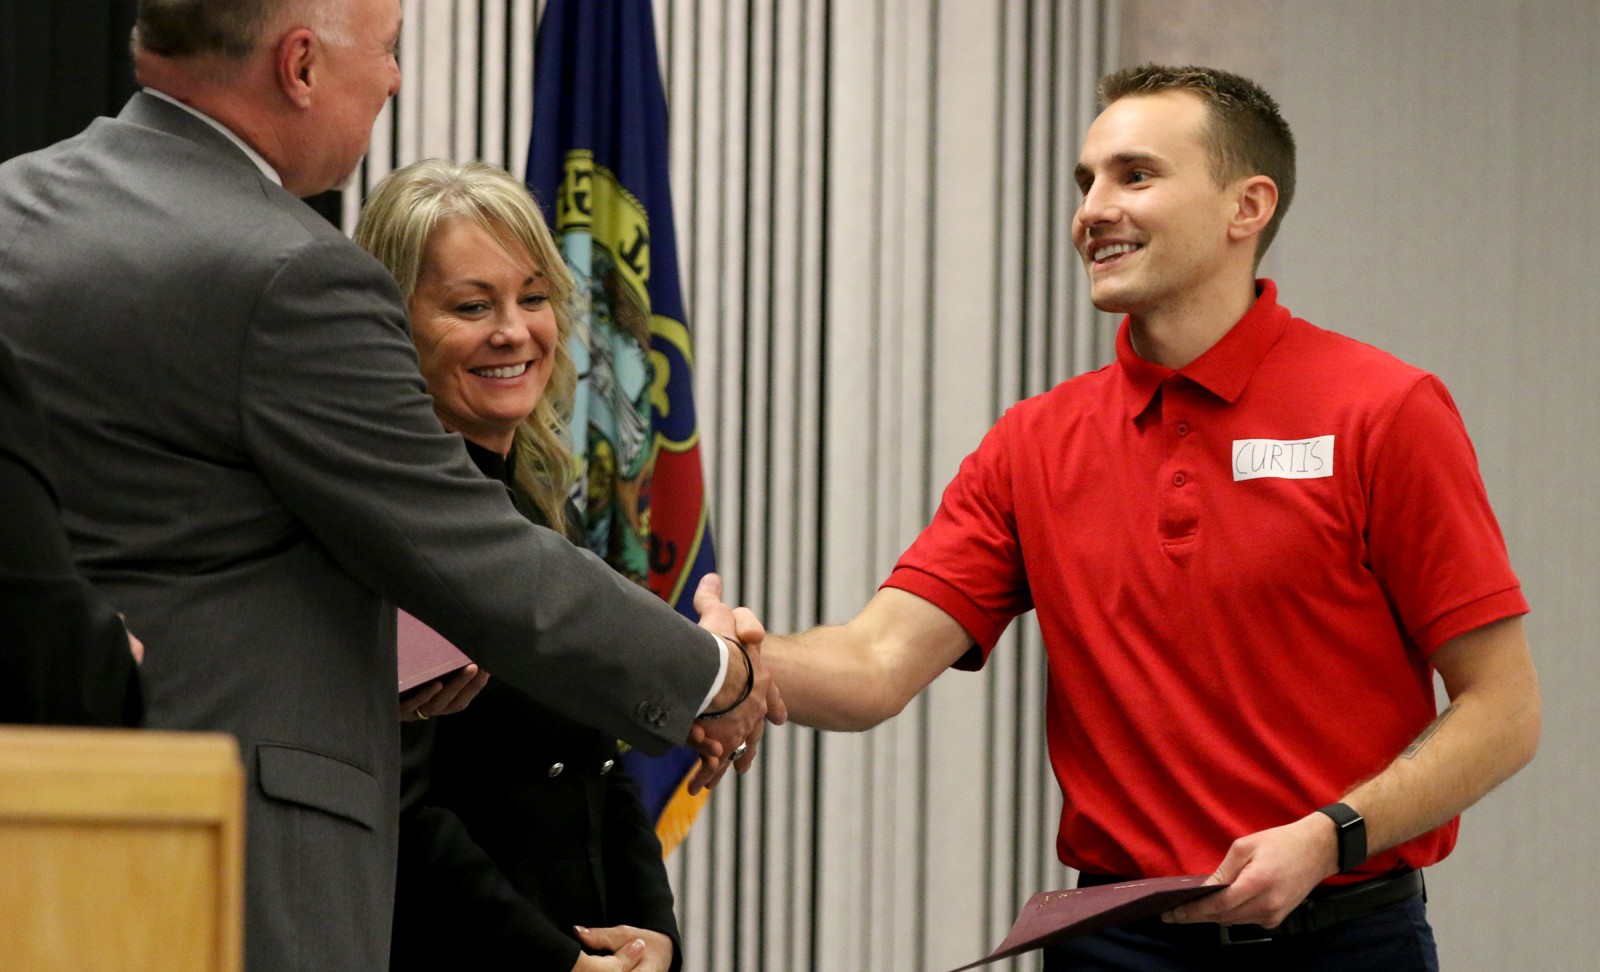 Fire Service Technology student Austin Curtis greets Kevin Platts during graduation